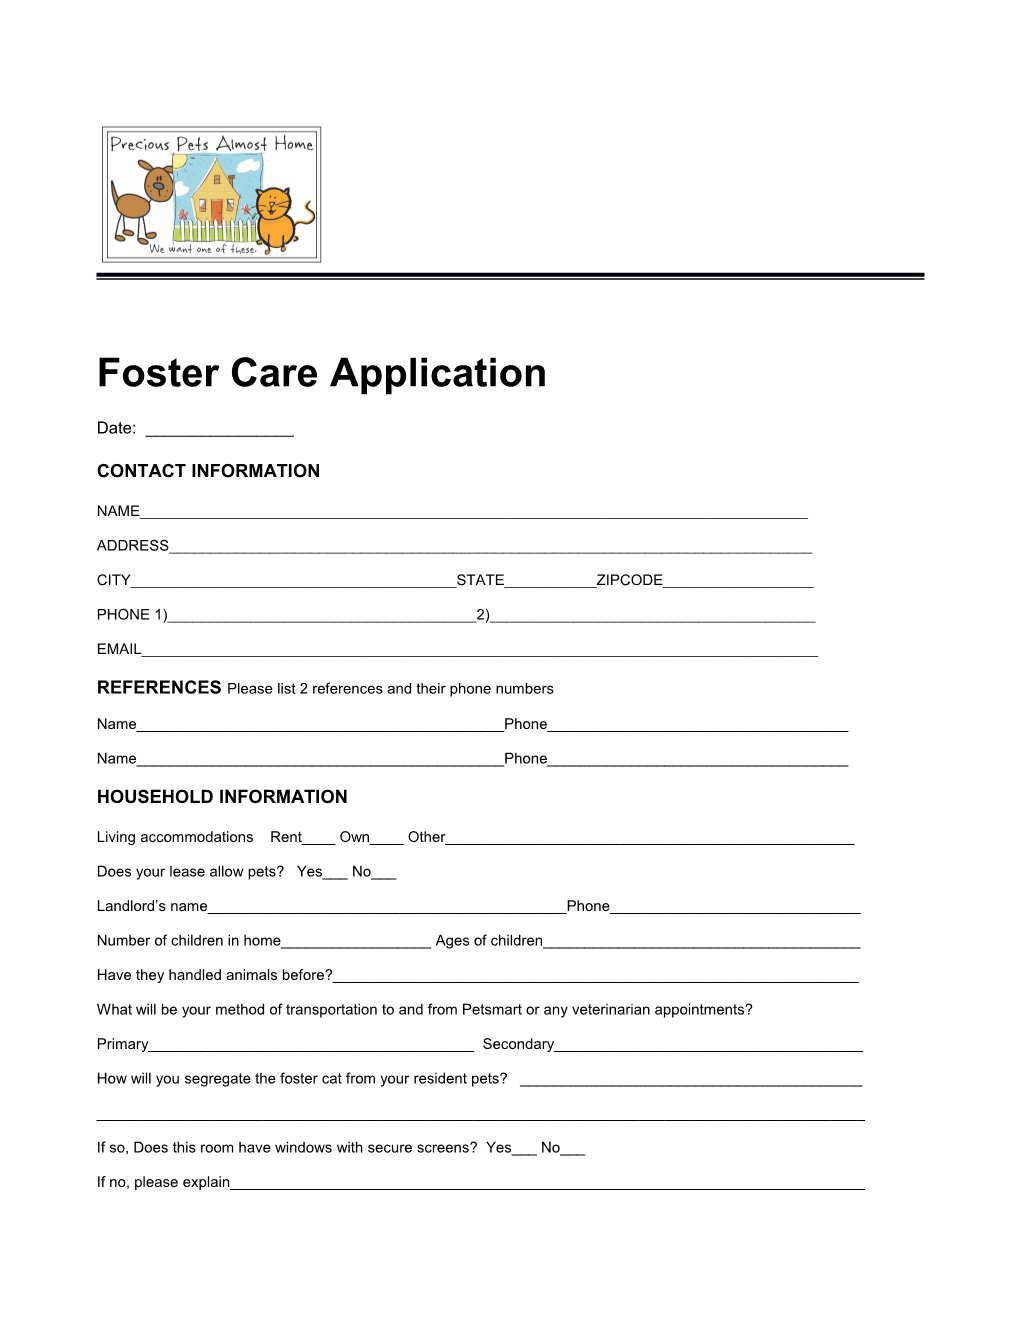 Foster Care Application